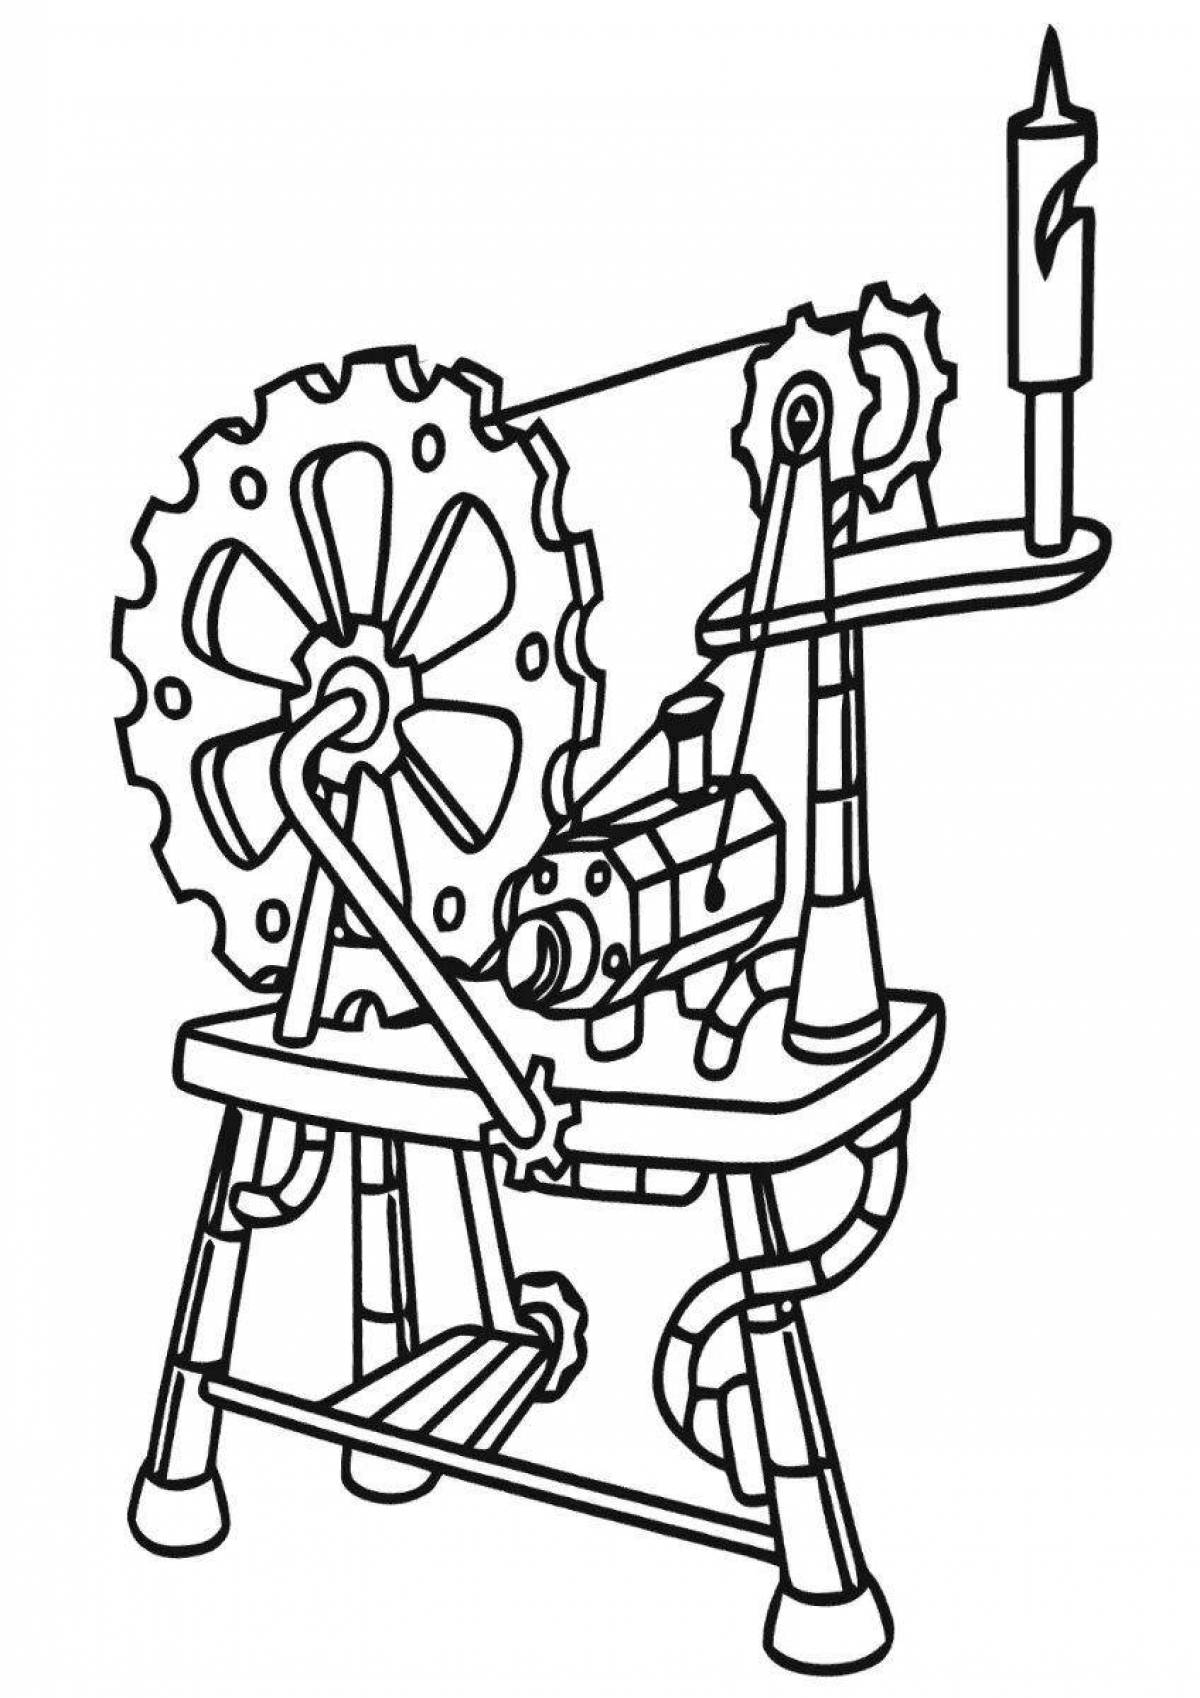 Animated spinning wheel coloring page